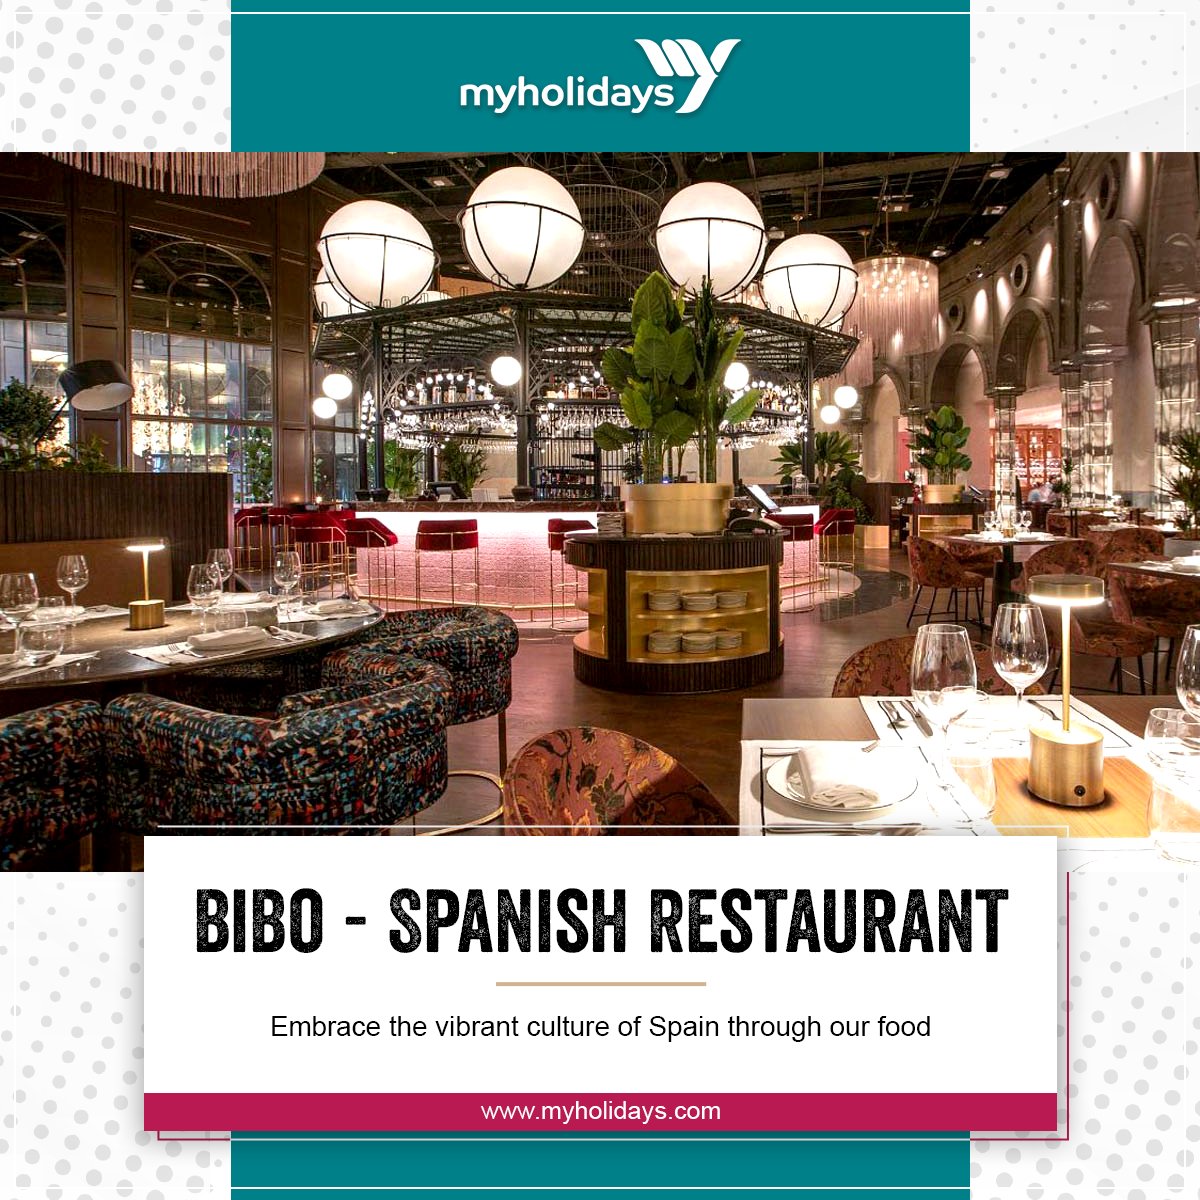 Are you in Doha and a fan of Spanish cuisine? Visit the iconic BiBo restaurant and enjoy the most authentic Spanish dishes with the spectacular decor, amazing interior and comfortable ambiance. Don’t forget to try their desserts. Reserve your table now! 

#spanishrestaurant